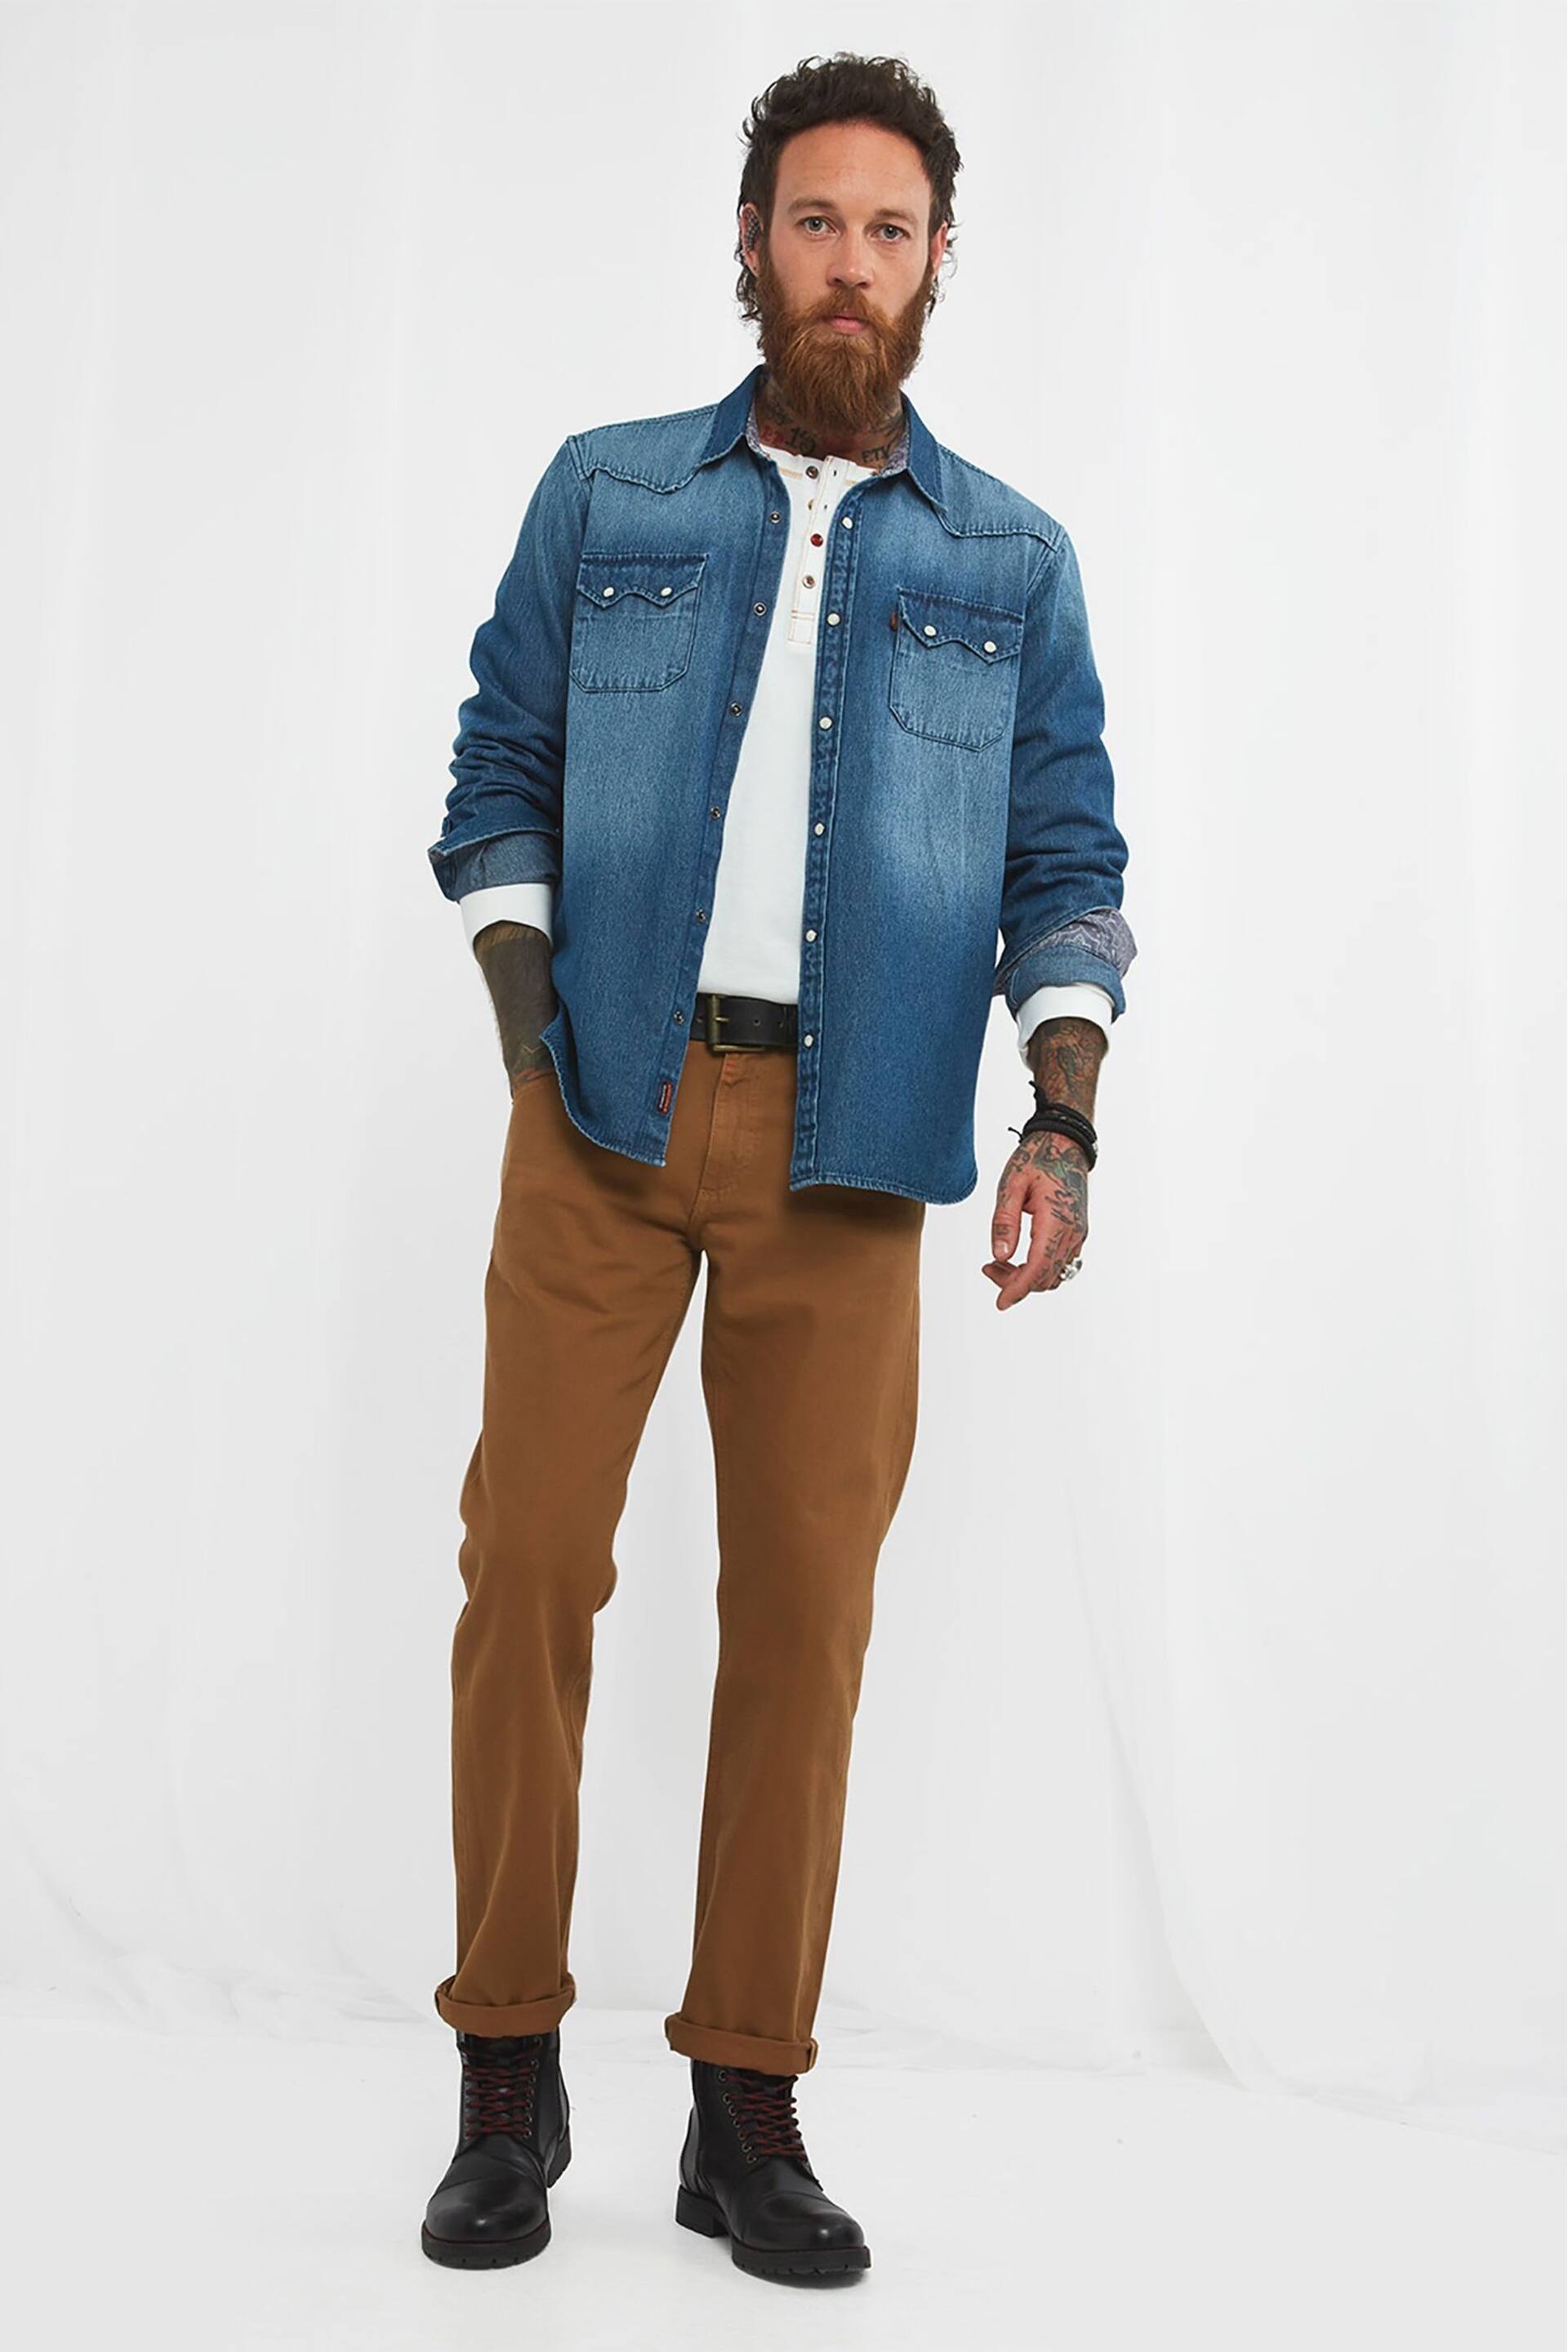 Joe Browns Brown Standout Coloured Denim Jean Trousers - Image 3 of 5